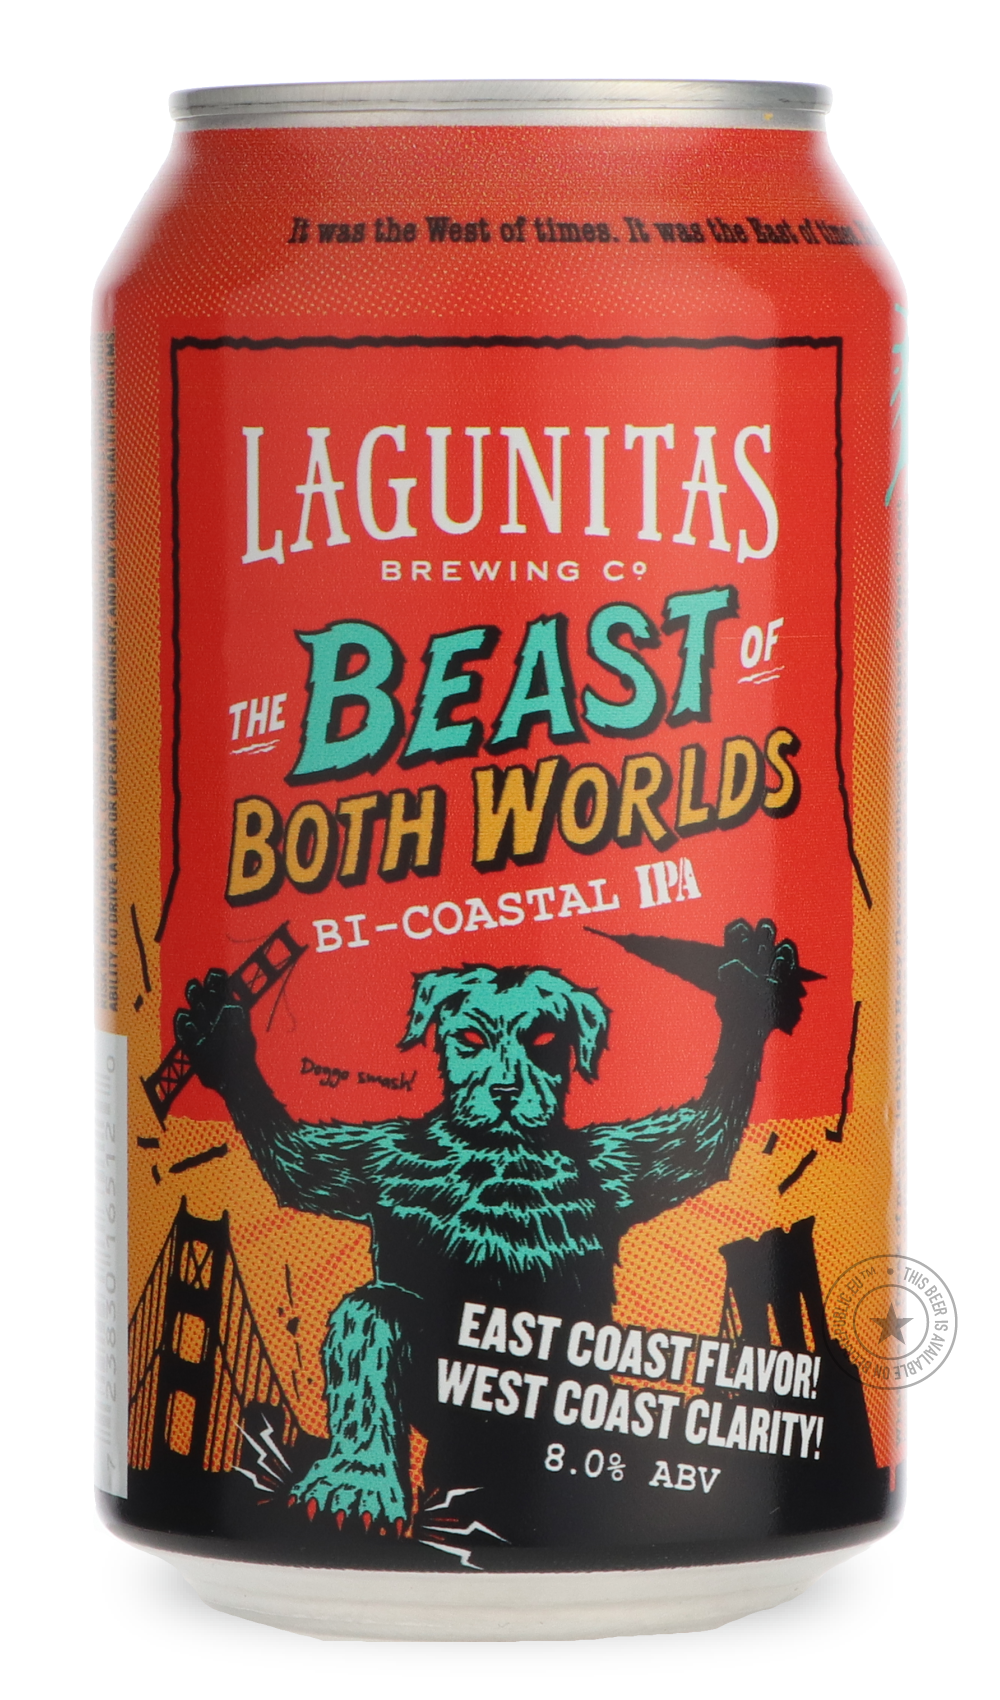 -Lagunitas- The Beast of Both Worlds-IPA- Only @ Beer Republic - The best online beer store for American & Canadian craft beer - Buy beer online from the USA and Canada - Bier online kopen - Amerikaans bier kopen - Craft beer store - Craft beer kopen - Amerikanisch bier kaufen - Bier online kaufen - Acheter biere online - IPA - Stout - Porter - New England IPA - Hazy IPA - Imperial Stout - Barrel Aged - Barrel Aged Imperial Stout - Brown - Dark beer - Blond - Blonde - Pilsner - Lager - Wheat - Weizen - Ambe